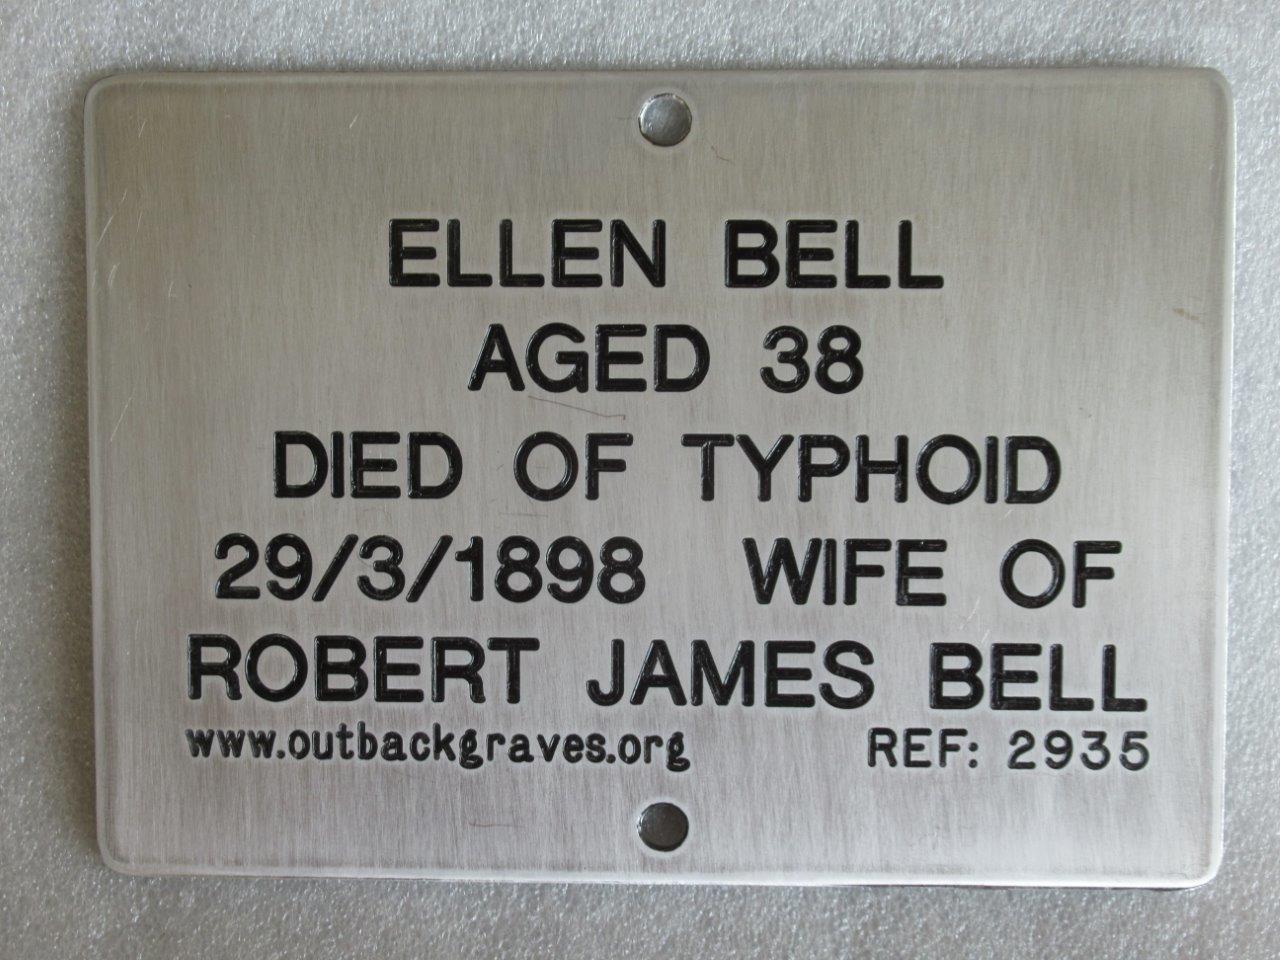 This is a photograph of plaque number 2935 for ELLEN BELL at MENZIES